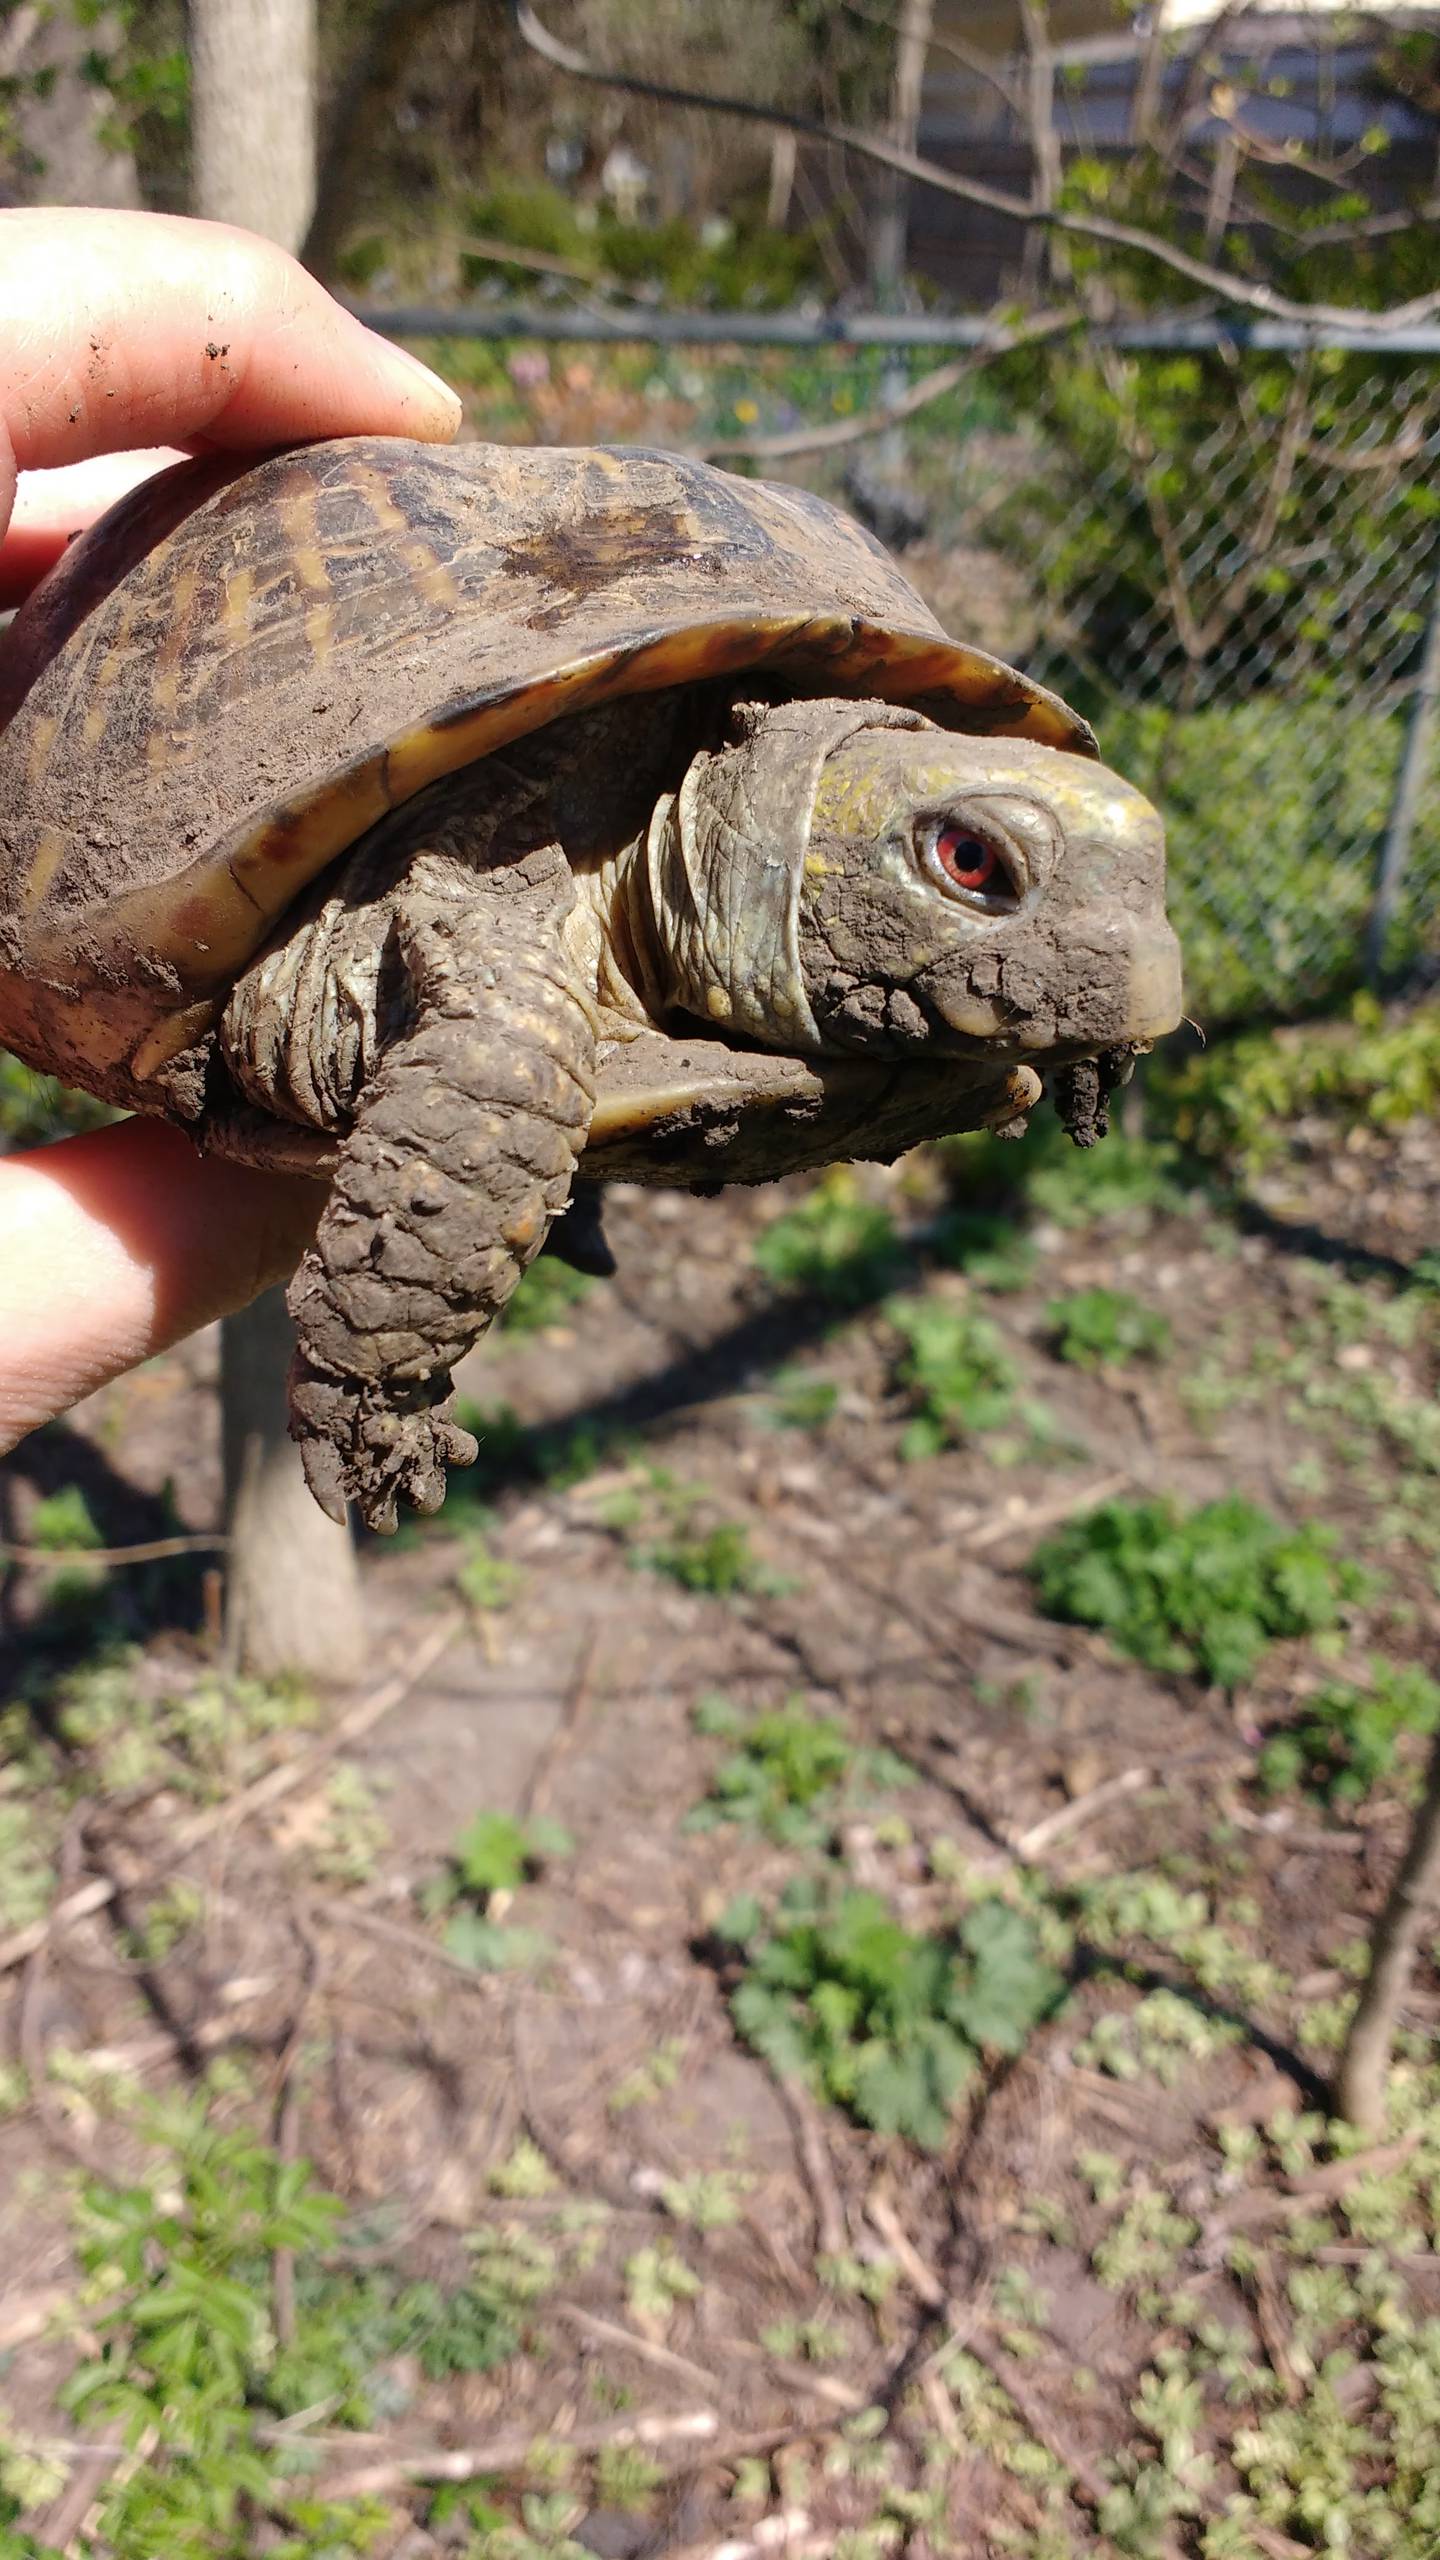 This Monday, Columbus Day, marks 45 years that Arthur the ornate box turtle has lived as a pet. His longevity, as well as improved conservation laws prohibiting the capture of other wild turtles, are worth celebrating.